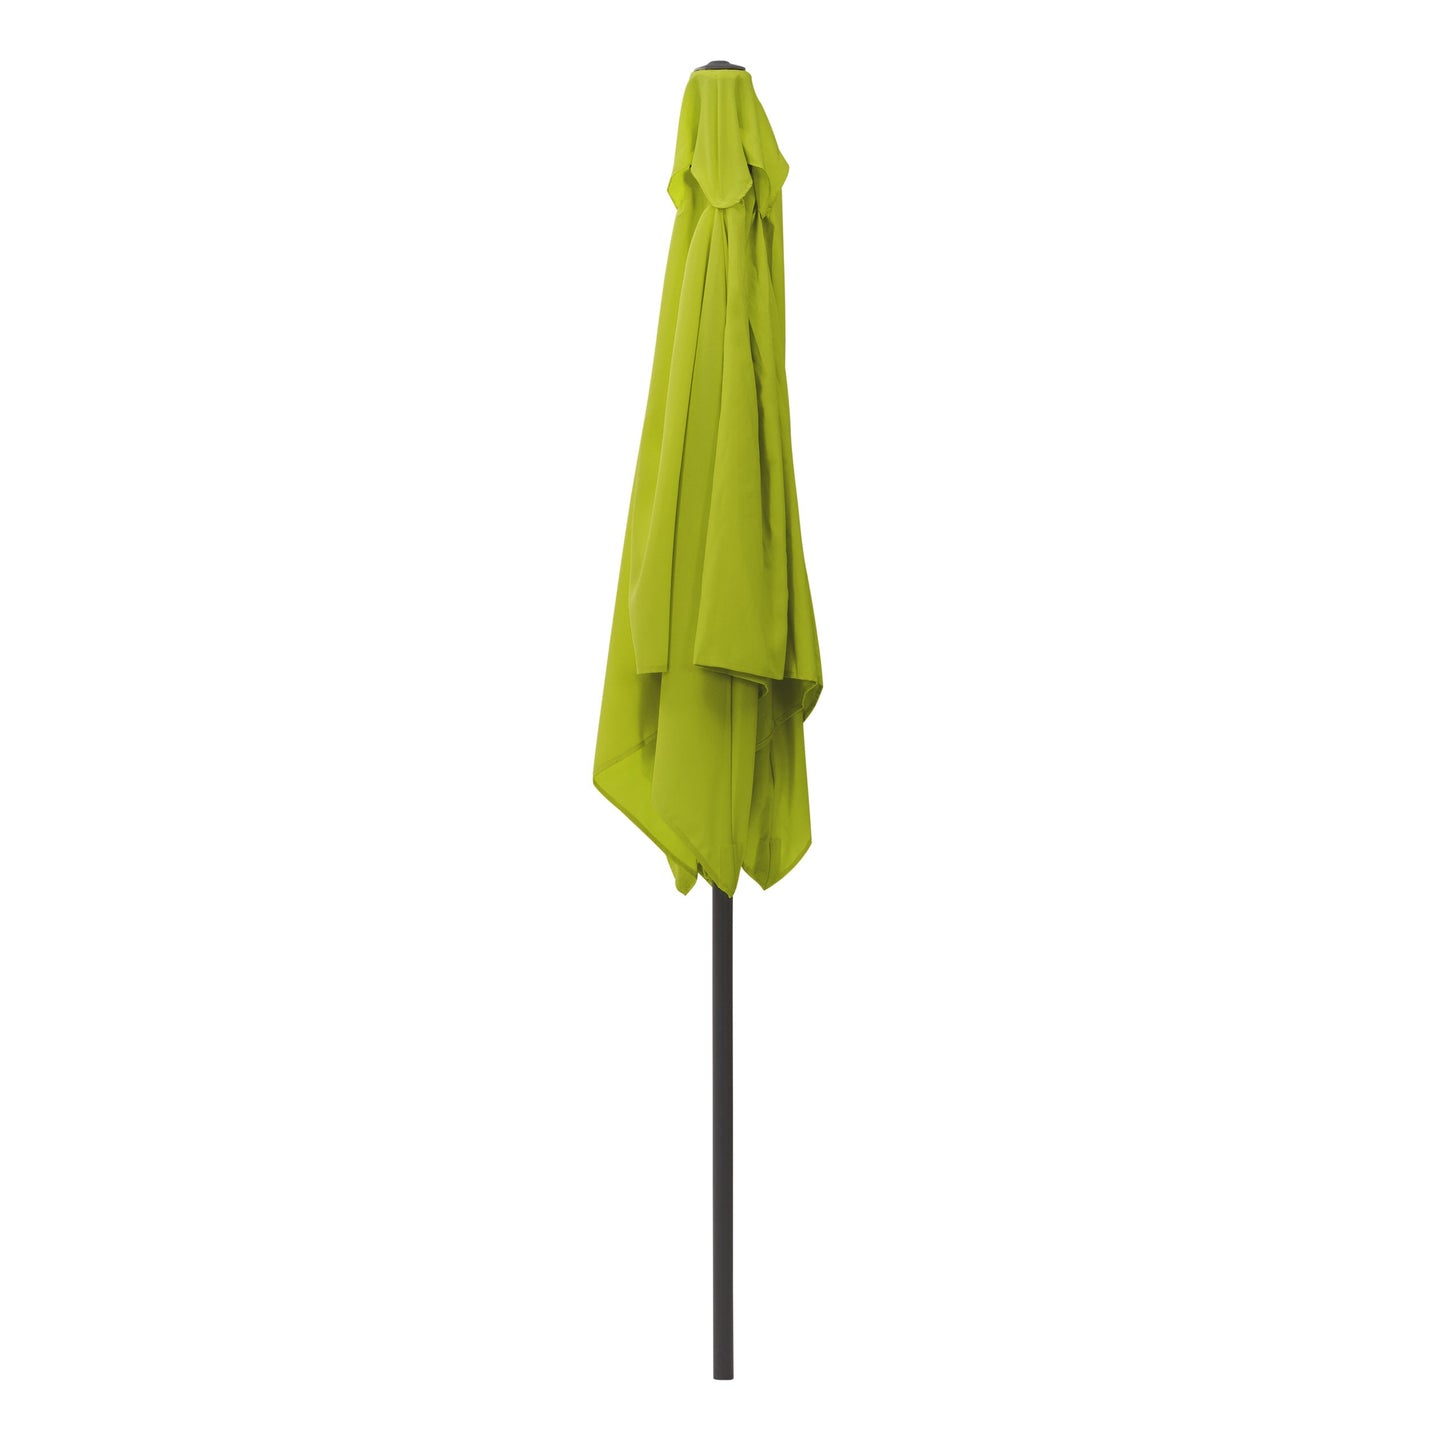 lime green square patio umbrella, tilting with base 300 Series product image CorLiving#color_lime-green